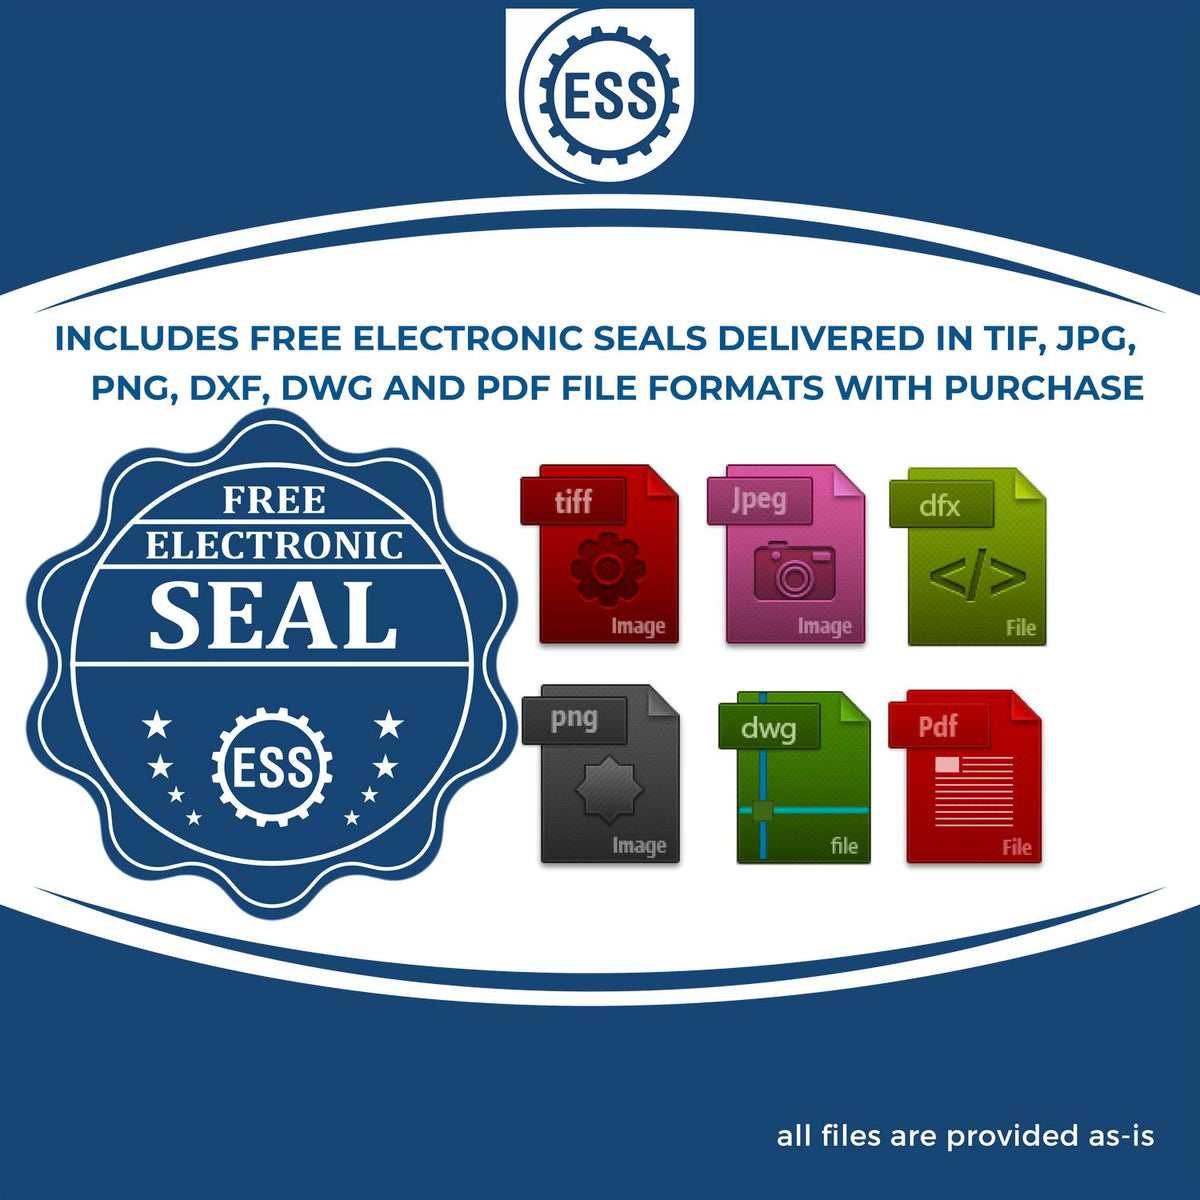 An infographic for the free electronic seal for the State of Kentucky Extended Long Reach Engineer Seal illustrating the different file type icons such as DXF, DWG, TIF, JPG and PNG.